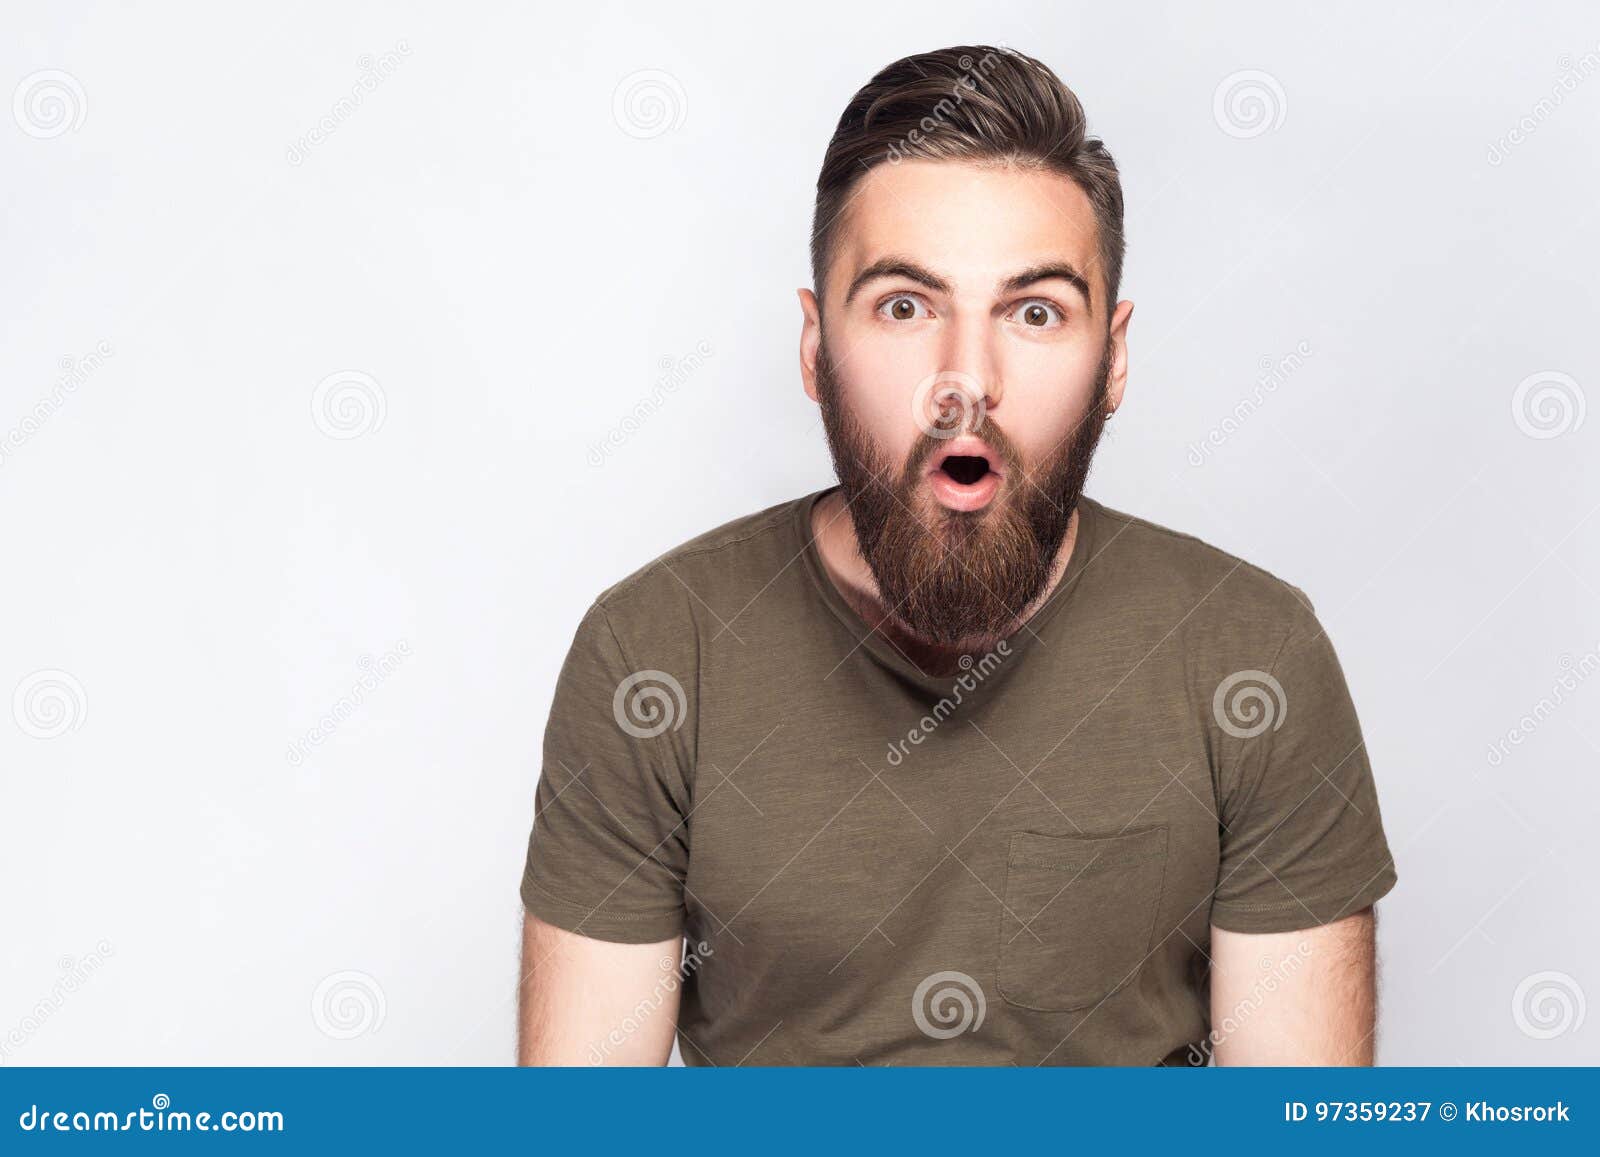 Portrait of Surprised Bearded Man with Dark Green T Shirt Against Light